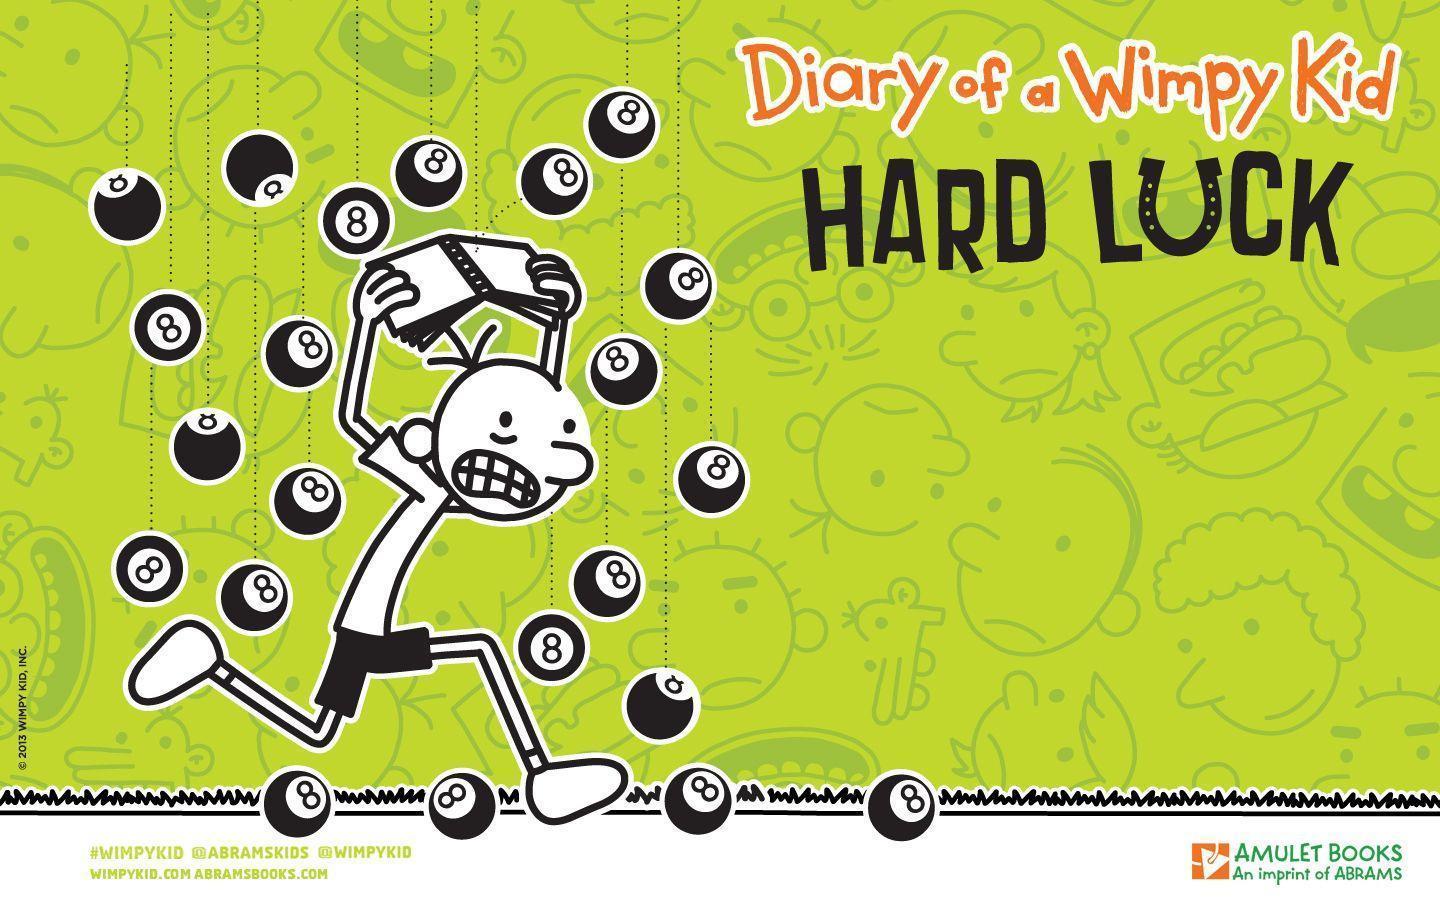 Wimpy wallpaper. Diary of a Wimpy Kid